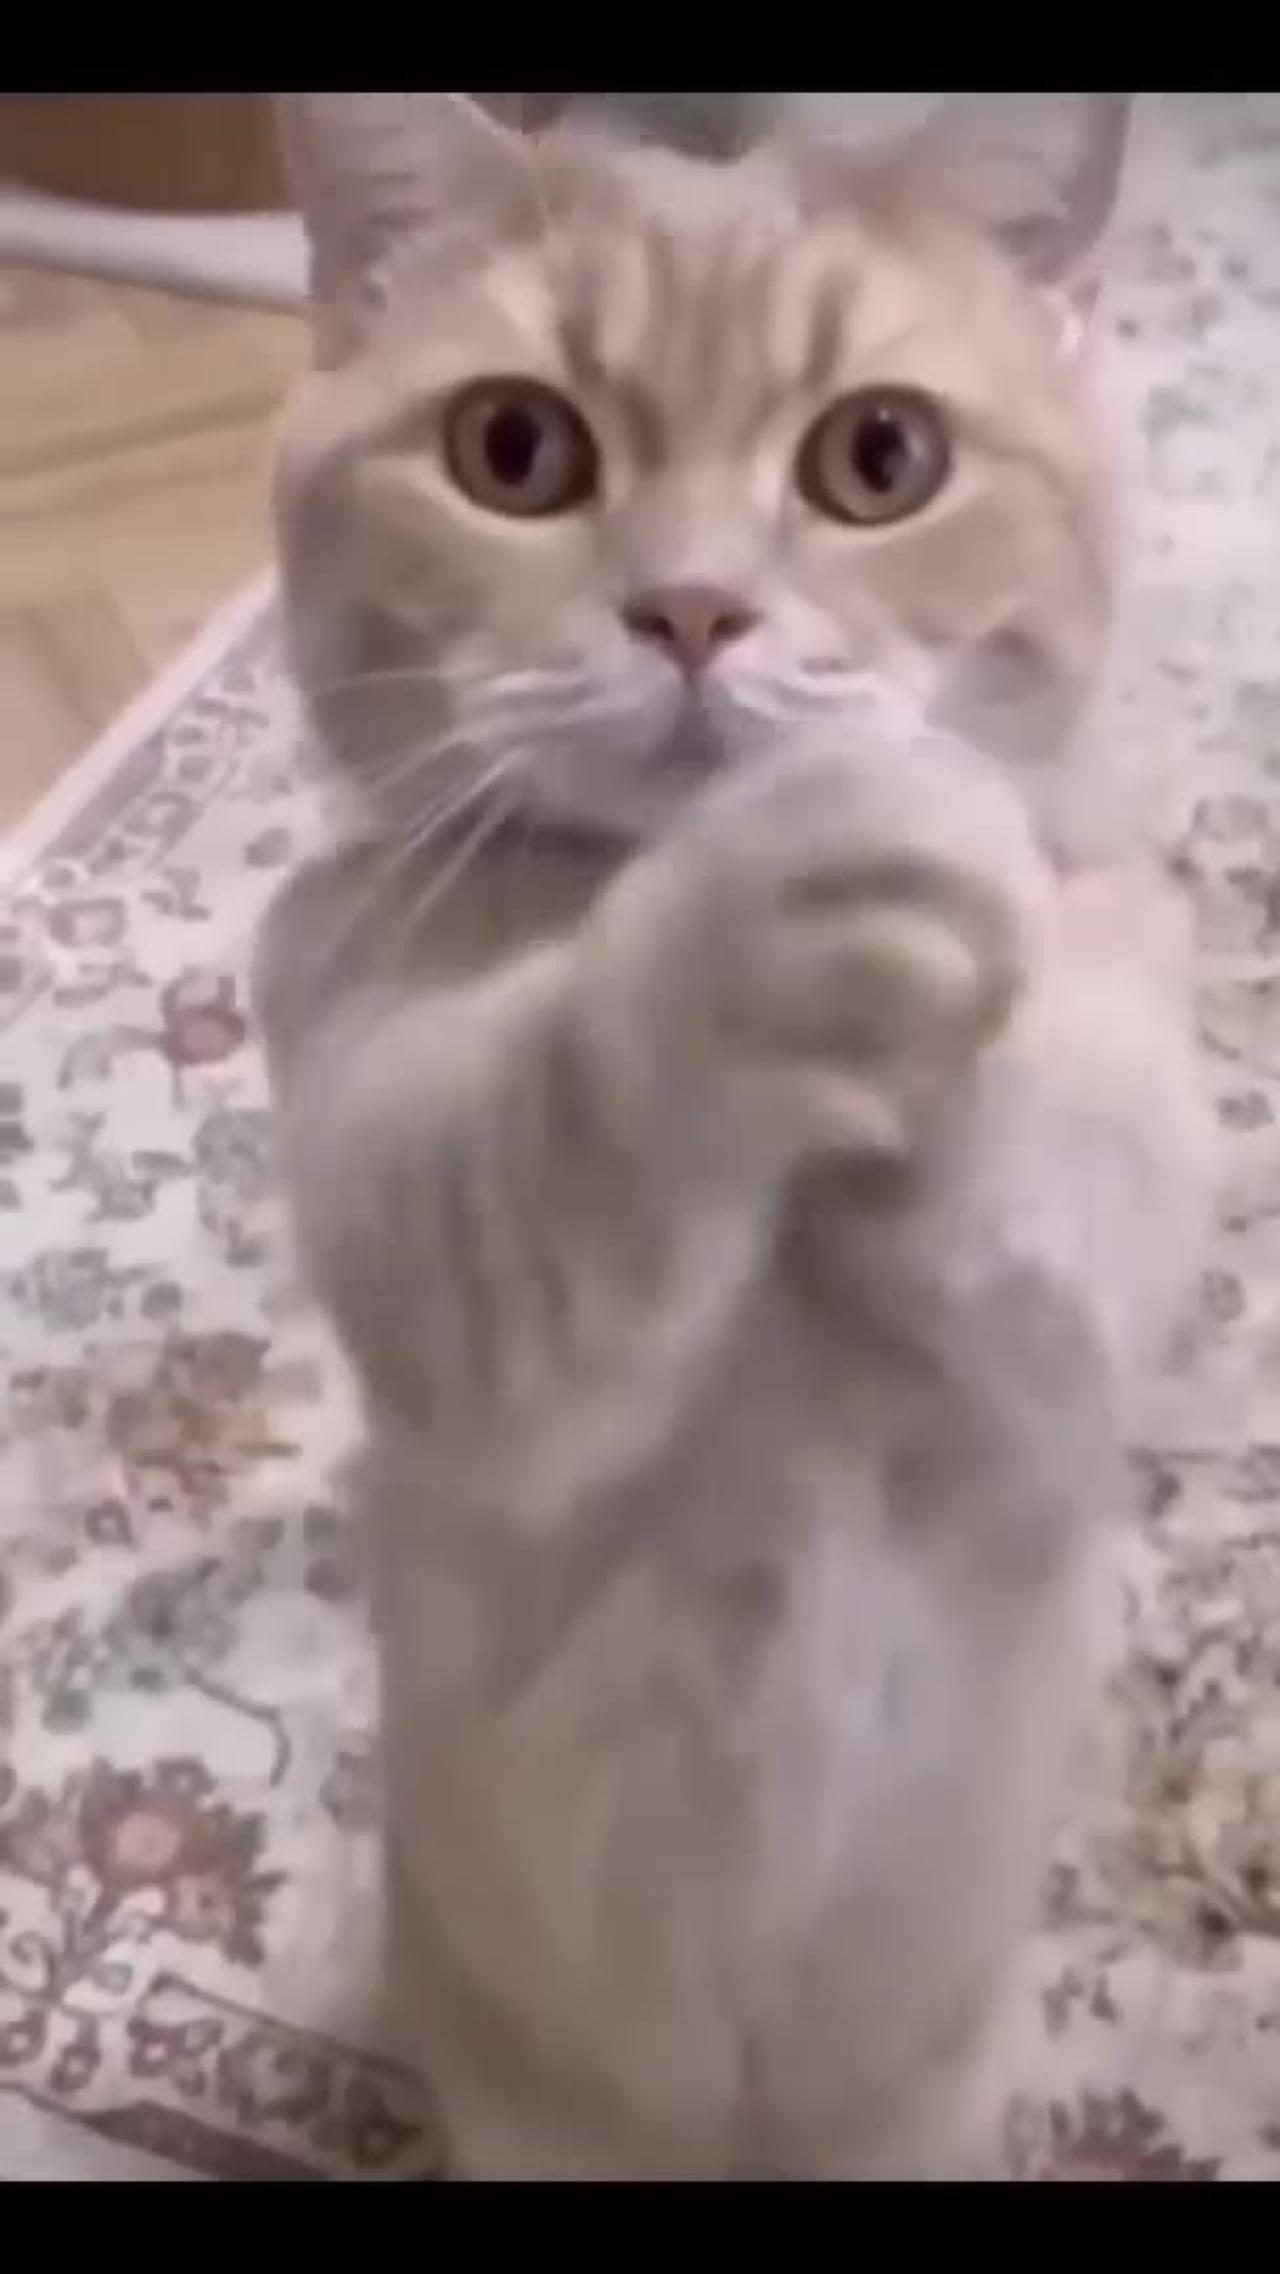 Purrfectly Hilarious! Watch This Adorable Cat's Epic Dance Moves